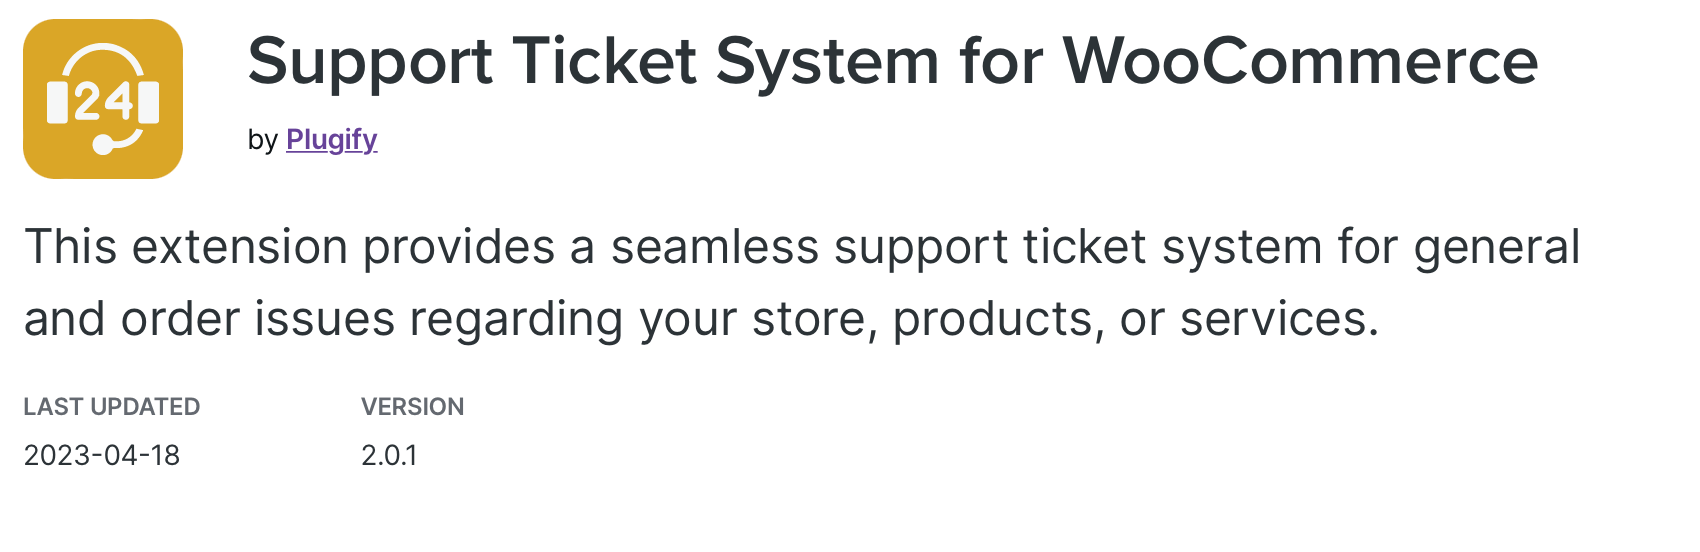 Support Ticket System for WooCommerce.